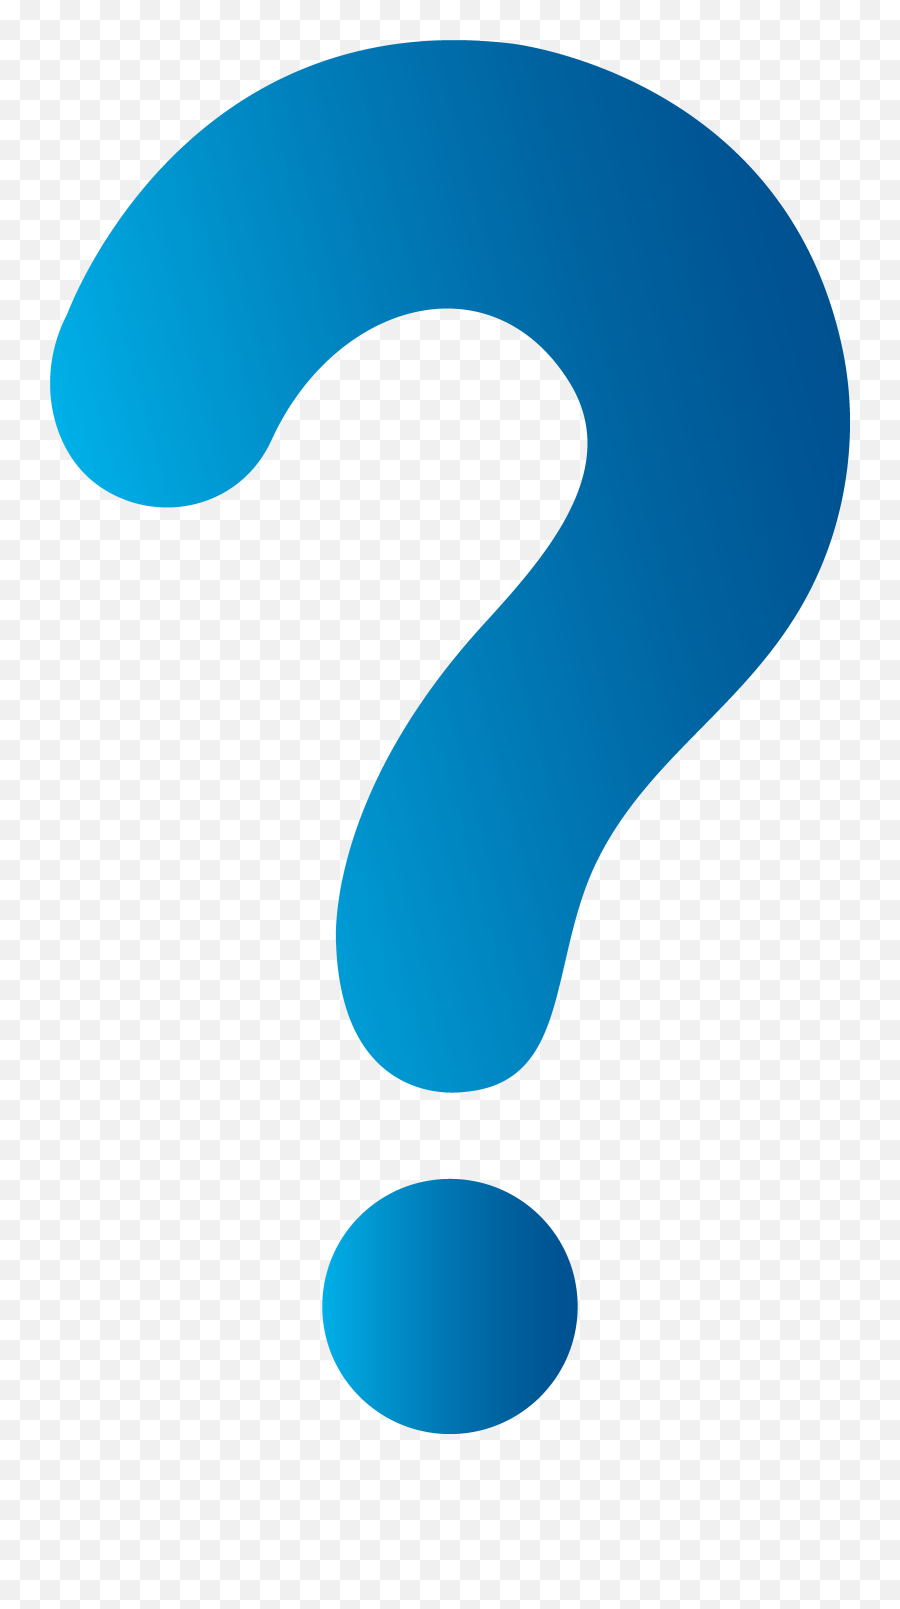 Question Mark Free Images On Pixabay Clip Art Many U2013 Cute766 Emoji,Any Questions Clipart